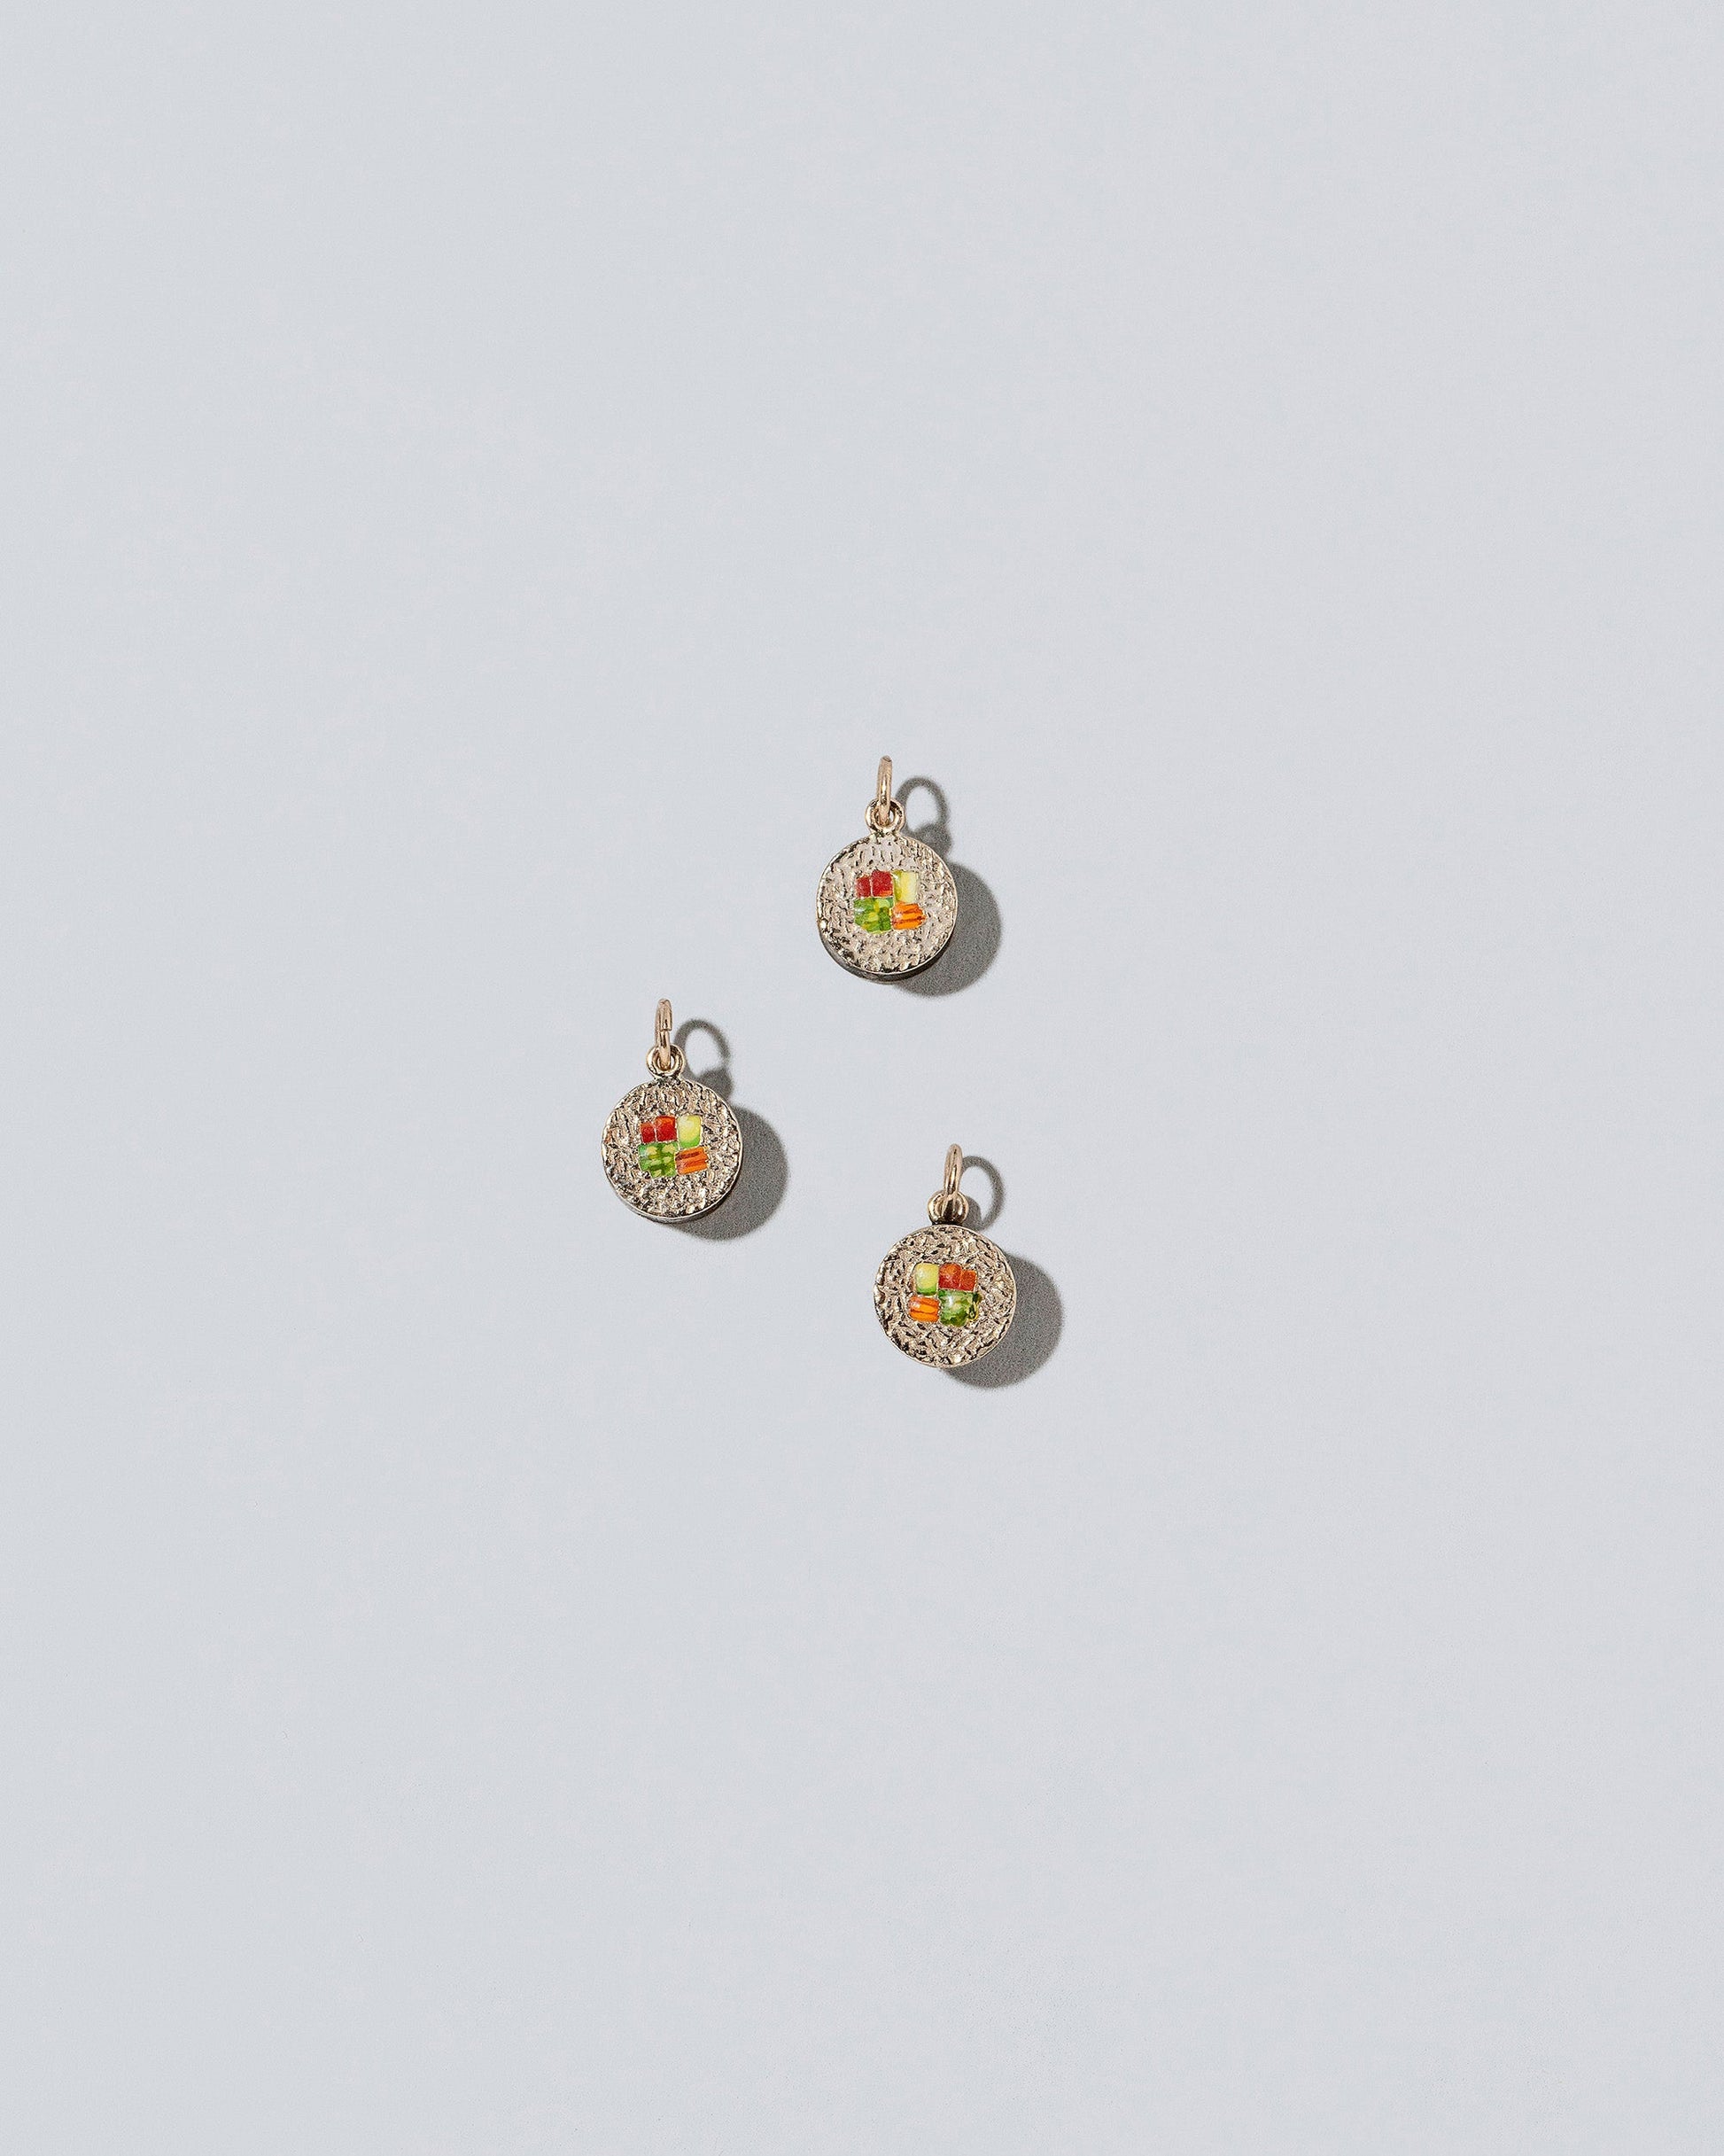  Sushi Charms on light color background.